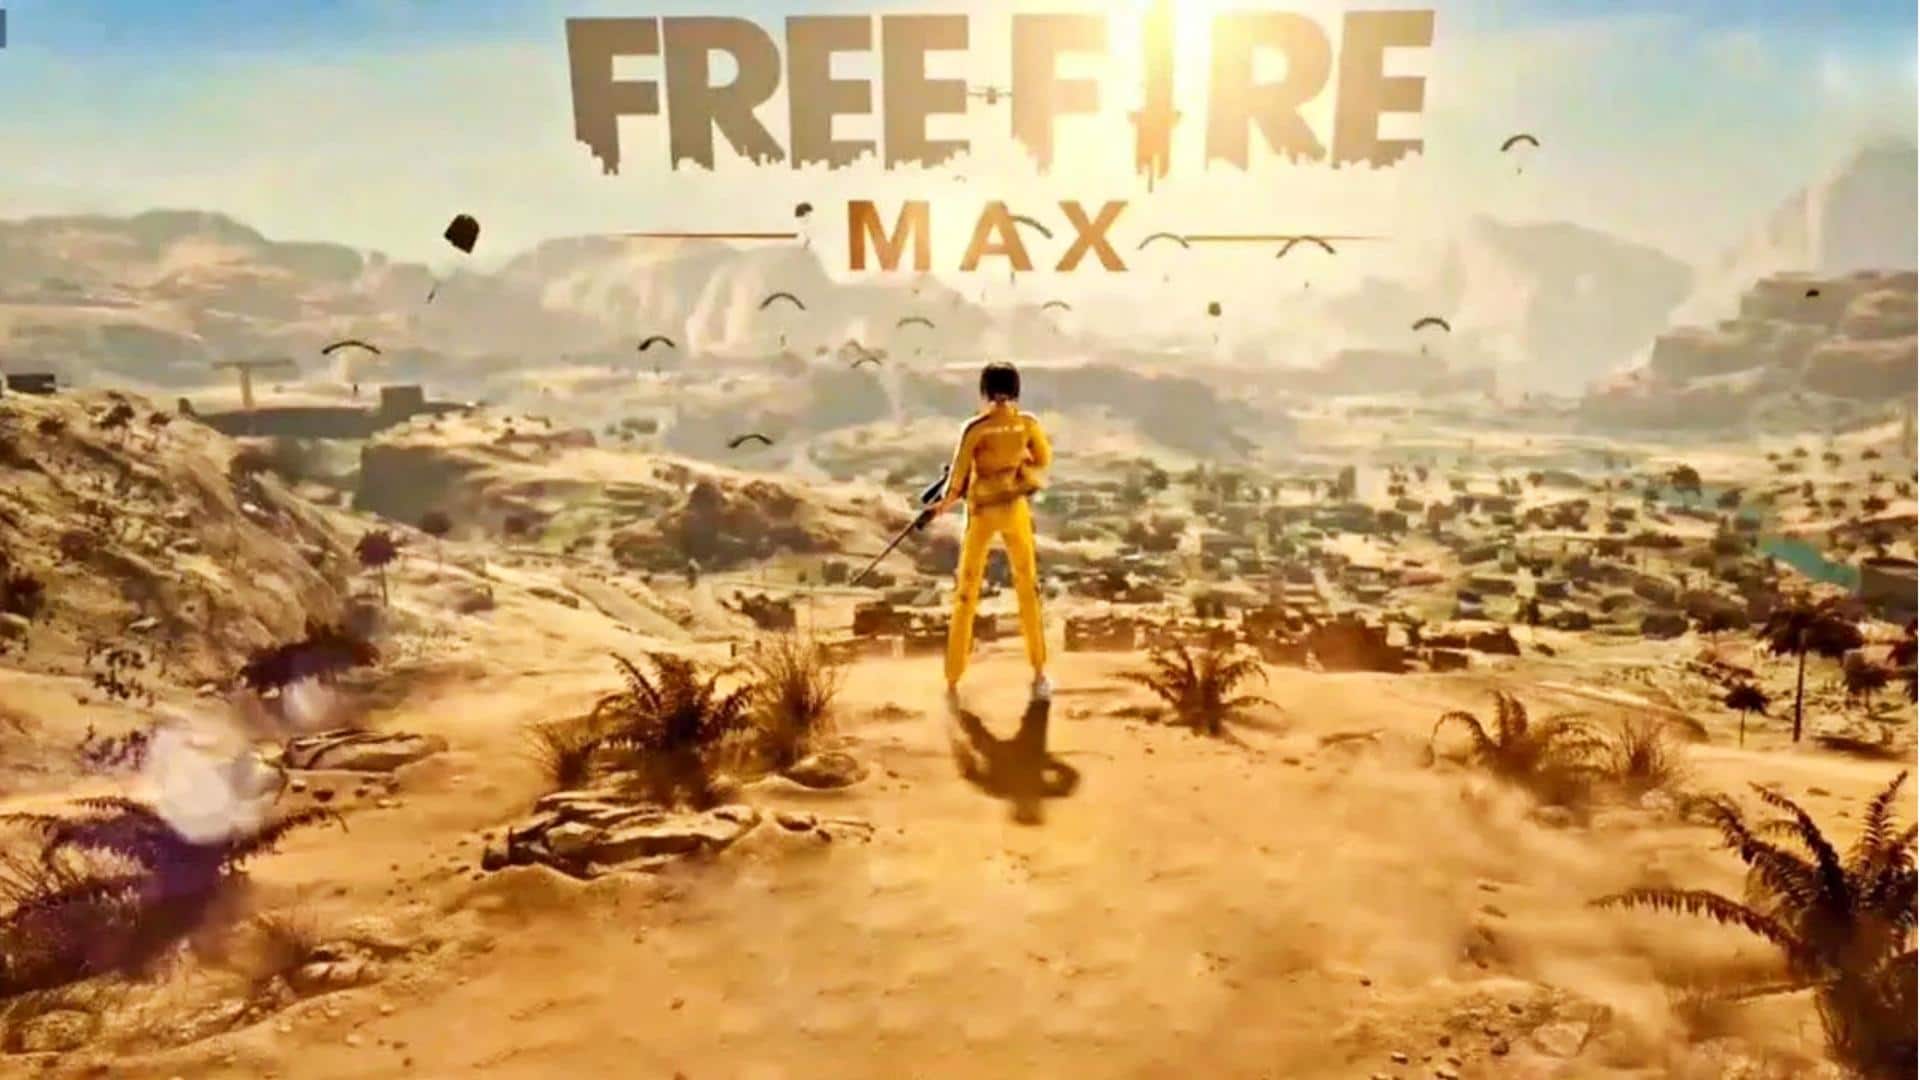 Free Fire MAX March 10 codes: Grab free in-game rewards